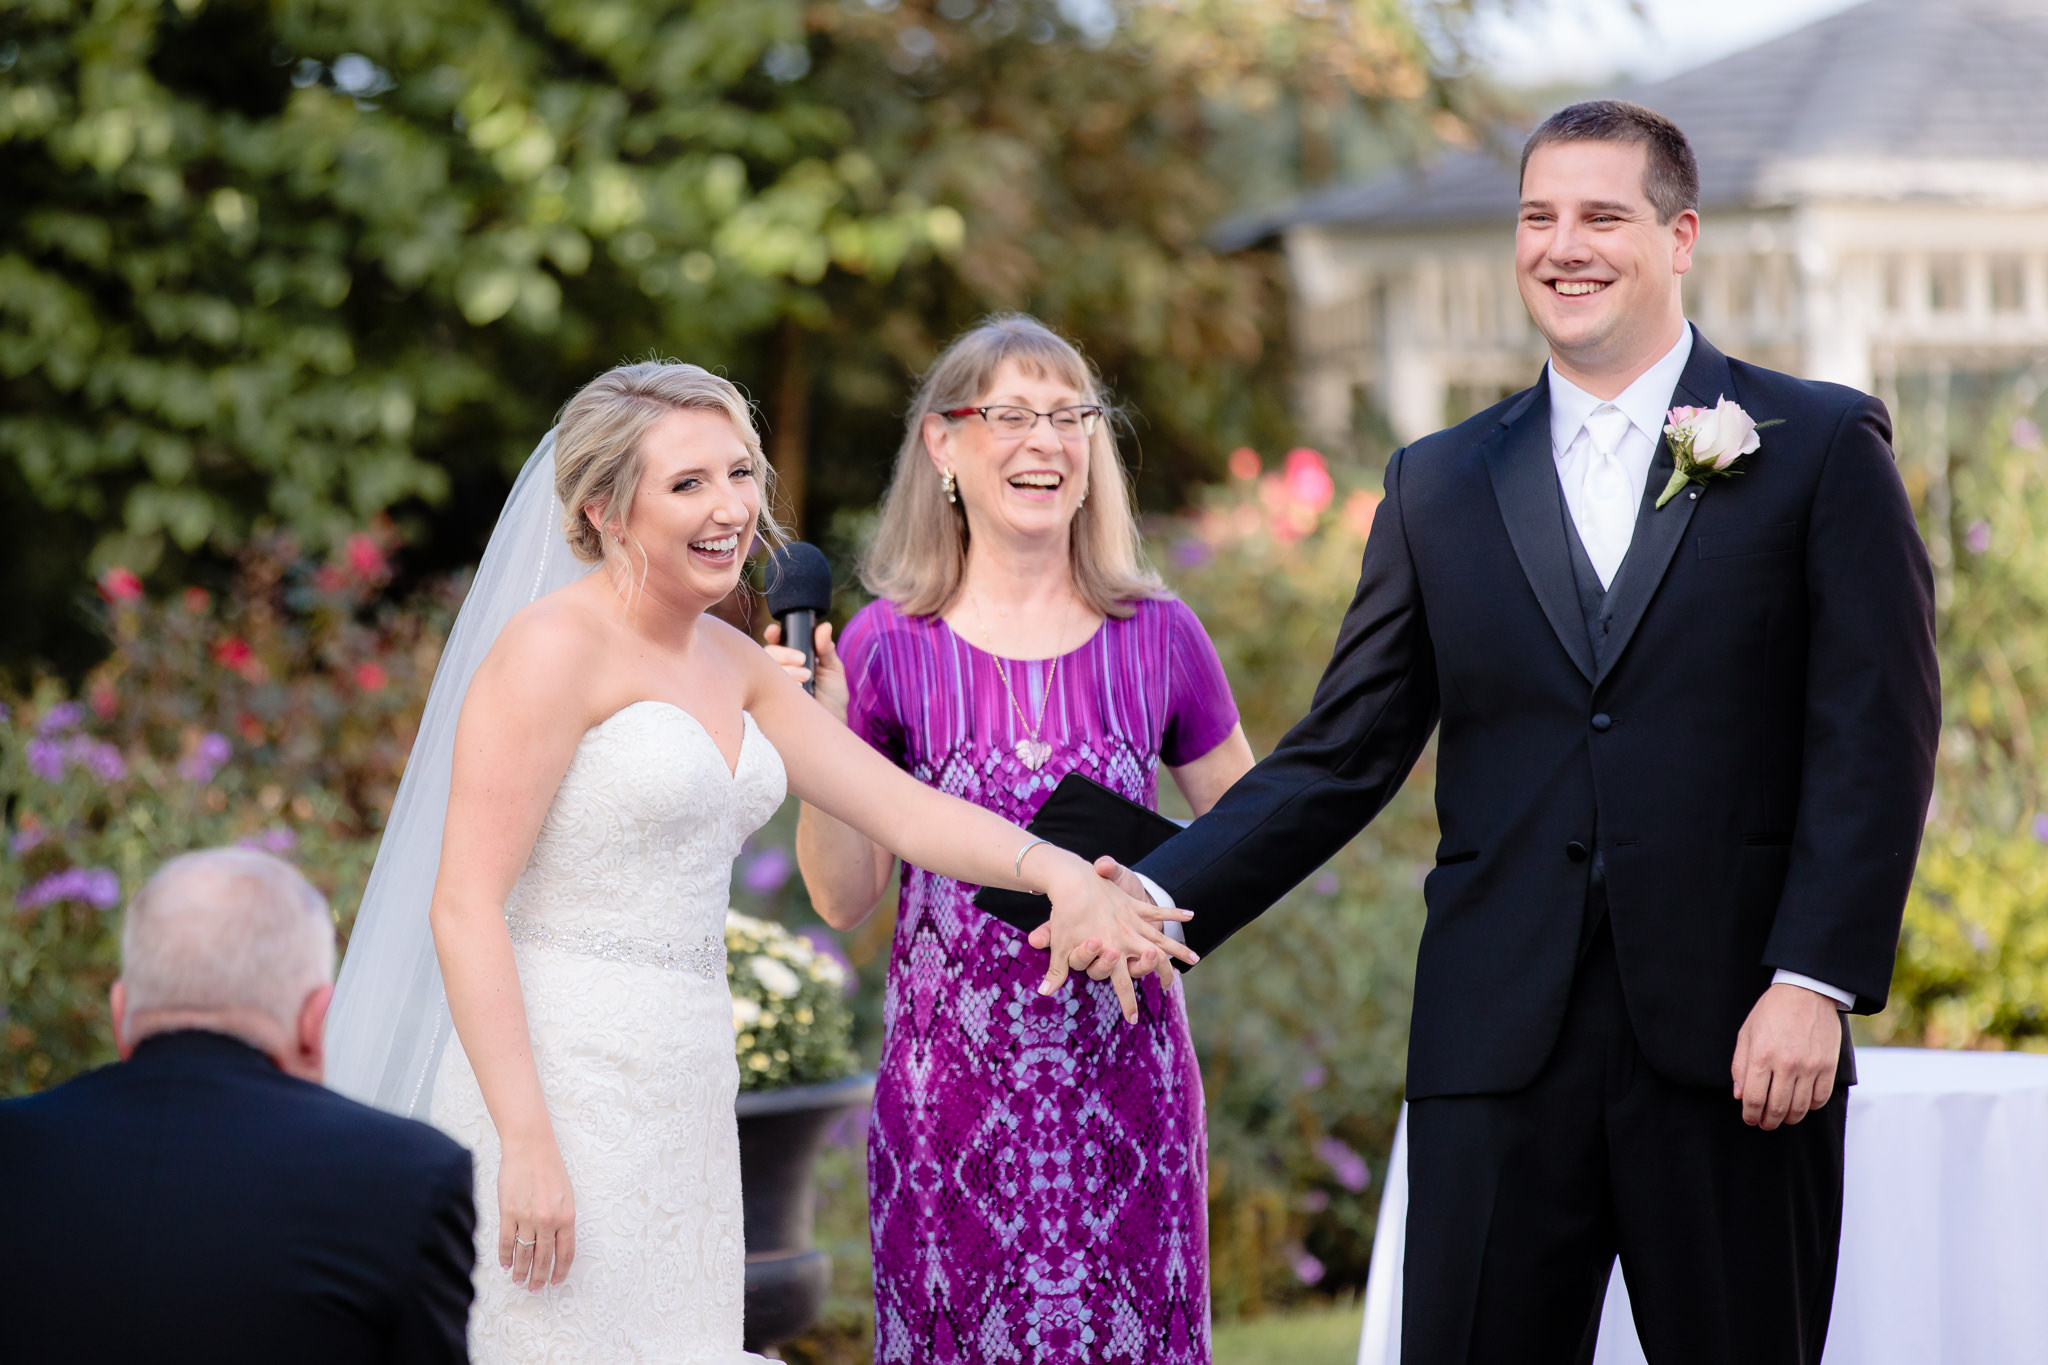 Bride & groom smile at their guests during a Greystone Fields wedding